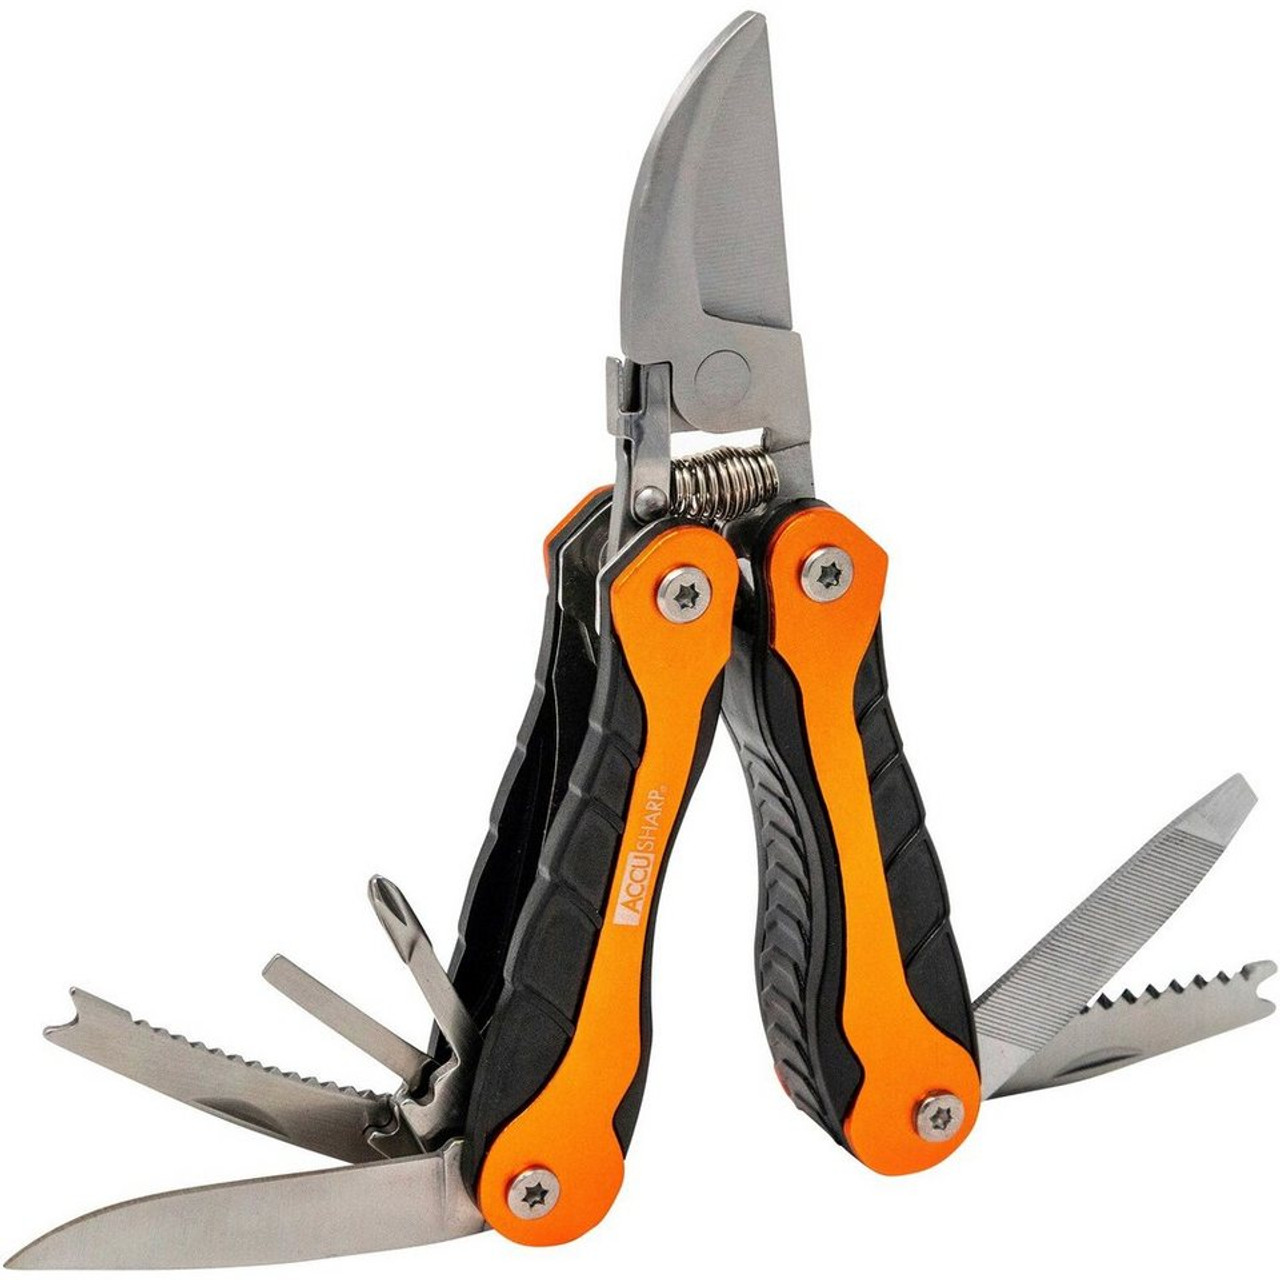 AccuSharp Sportsman's Multi-Tool with Pruners